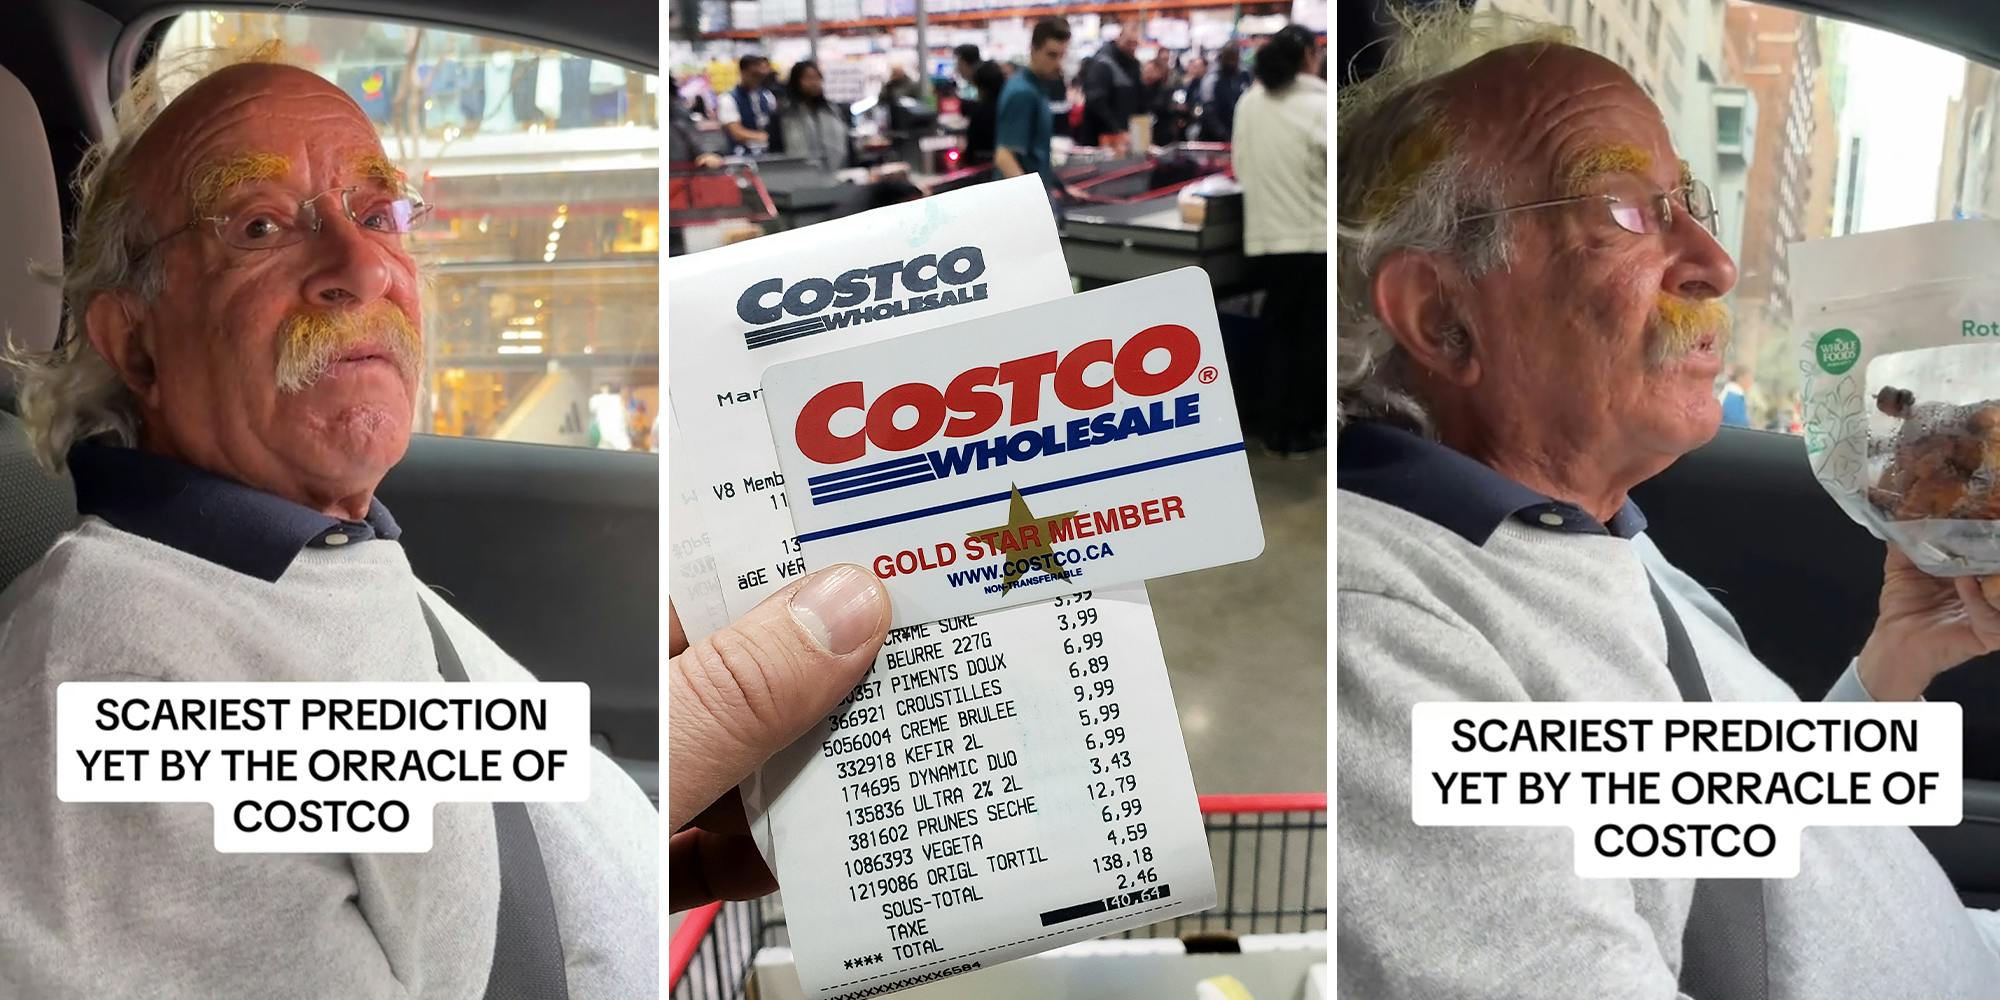 Man known as the ‘Oracle of Costco’ predicts this major change will be coming by the end of the year